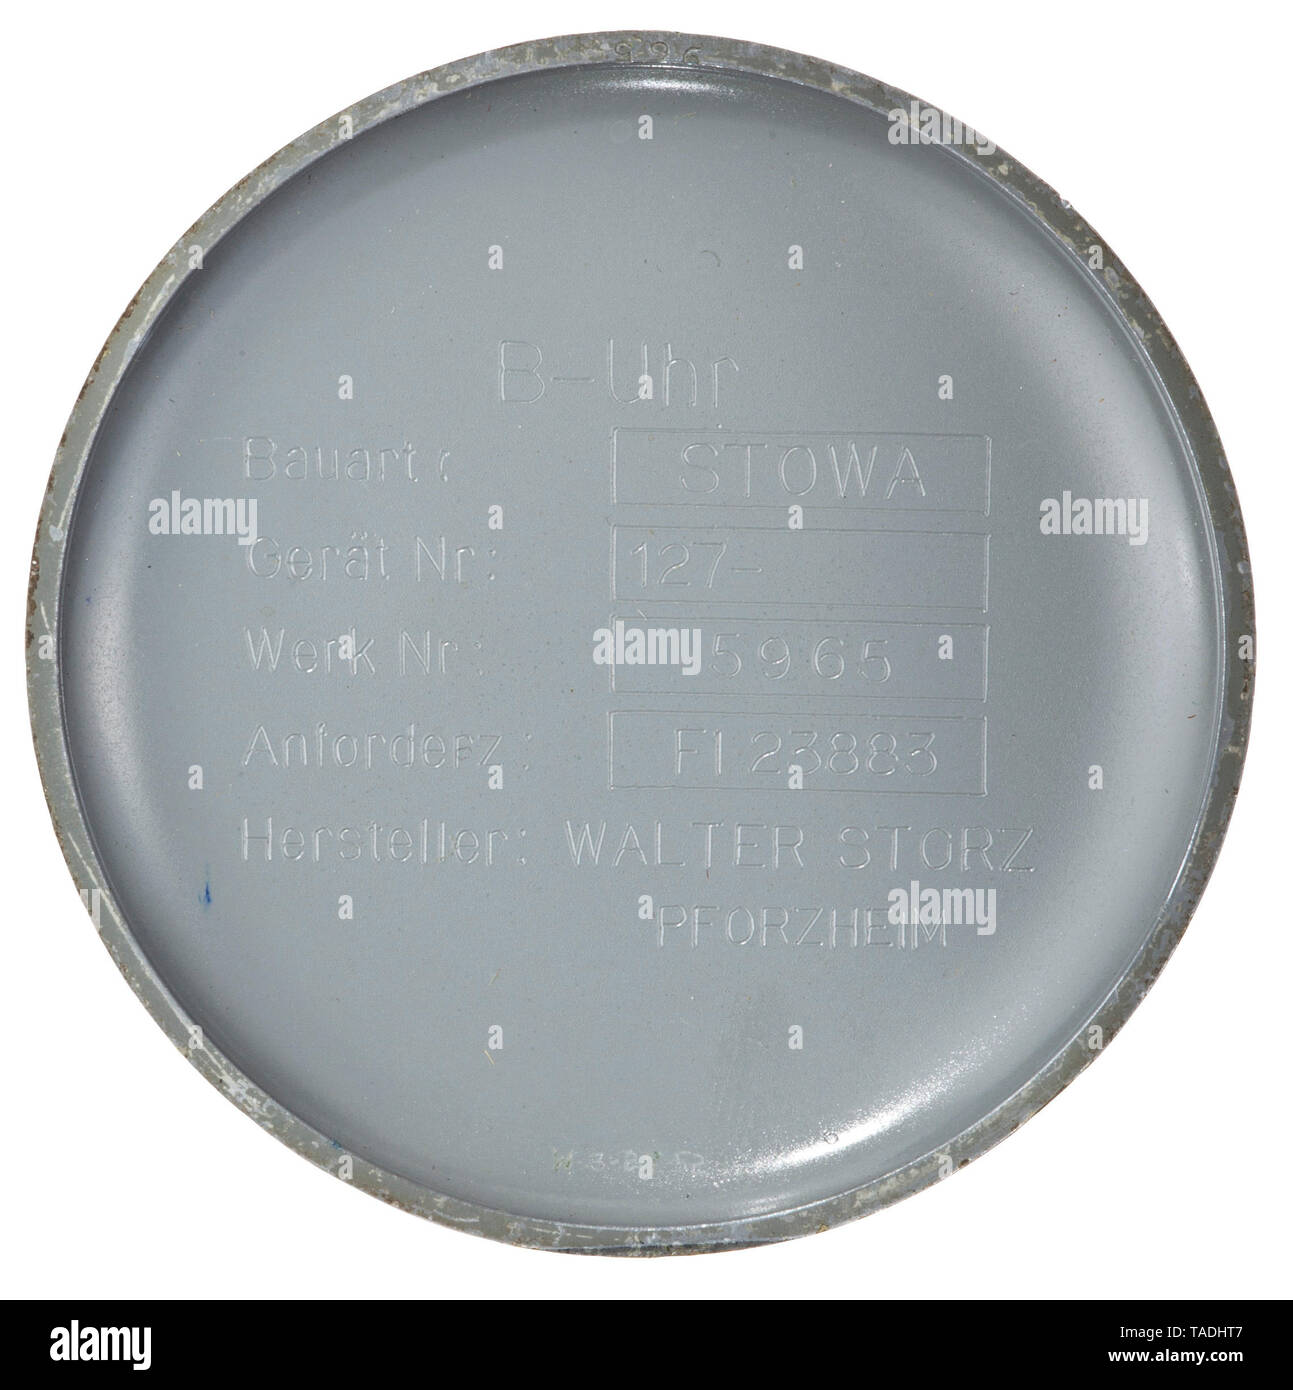 An observation watch of the German Luftwaffe mounted by 'Stowa' = Walter Storz, Pforzheim Black dial with noctilucent Arabic numerals, luminous blued pointer (small rupture in the minute hand). Matte housing with lateral requisition mark 'Fl 23883', the cover with an exterior works number '5965', the inside with 'B-Uhr - Bauart: Stowa - Gerät-Nr. 127 - Werk-Nr. 5965 - Anforderz. Fl. 23883 - Hersteller: Walter Storz Pforzheim'. Matching numbered '5965', jewelled movement with 20 rubies, fine sanding and swan-neck fine adjustment. Original riveted (re-riveted in places) brown, Editorial-Use-Only Stock Photo